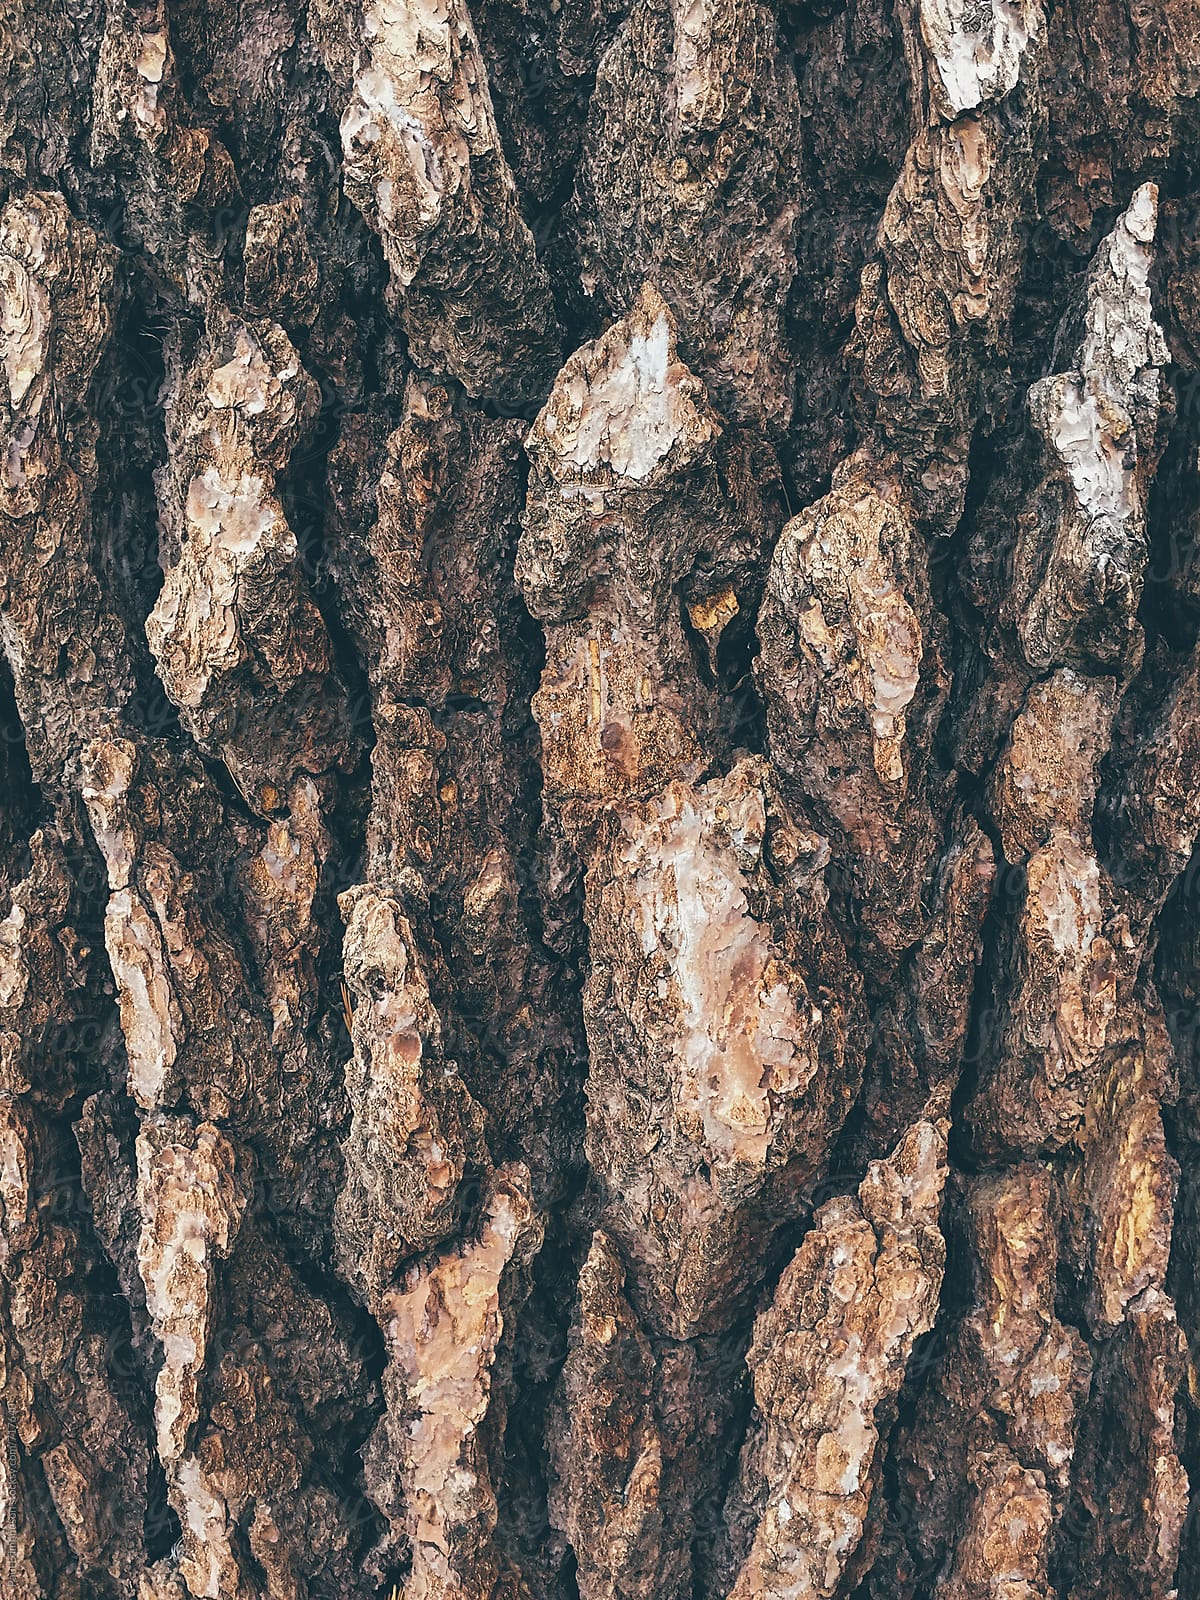 Close up of bark from old growth pine tree